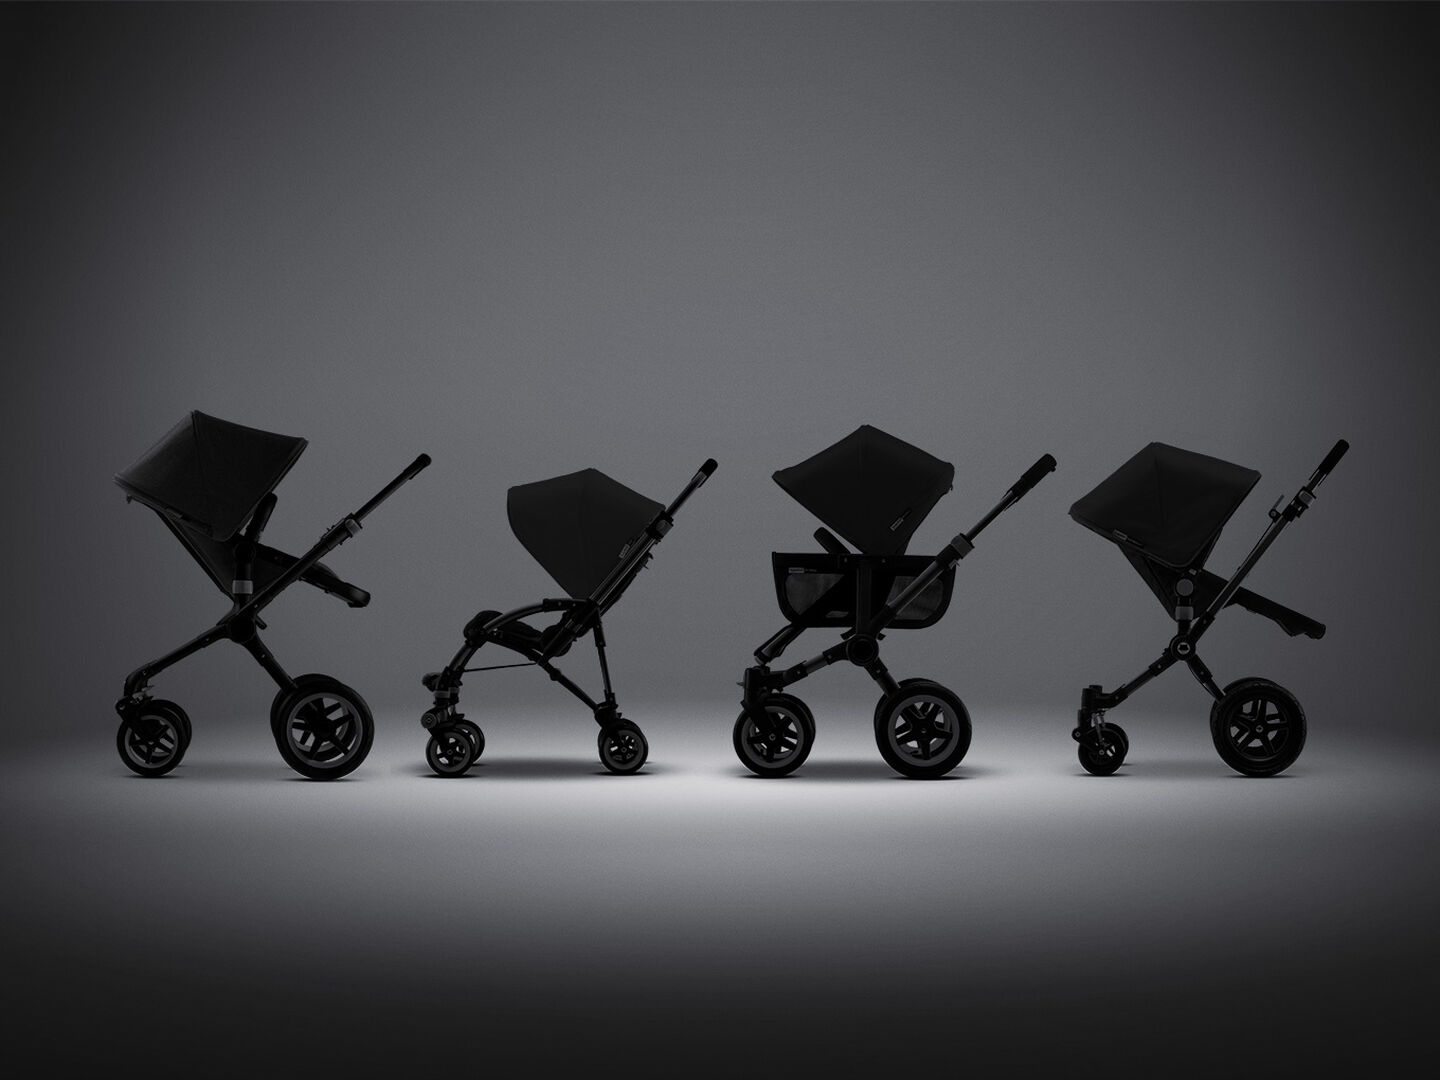 Four backlit Bugaboo strollers on display.